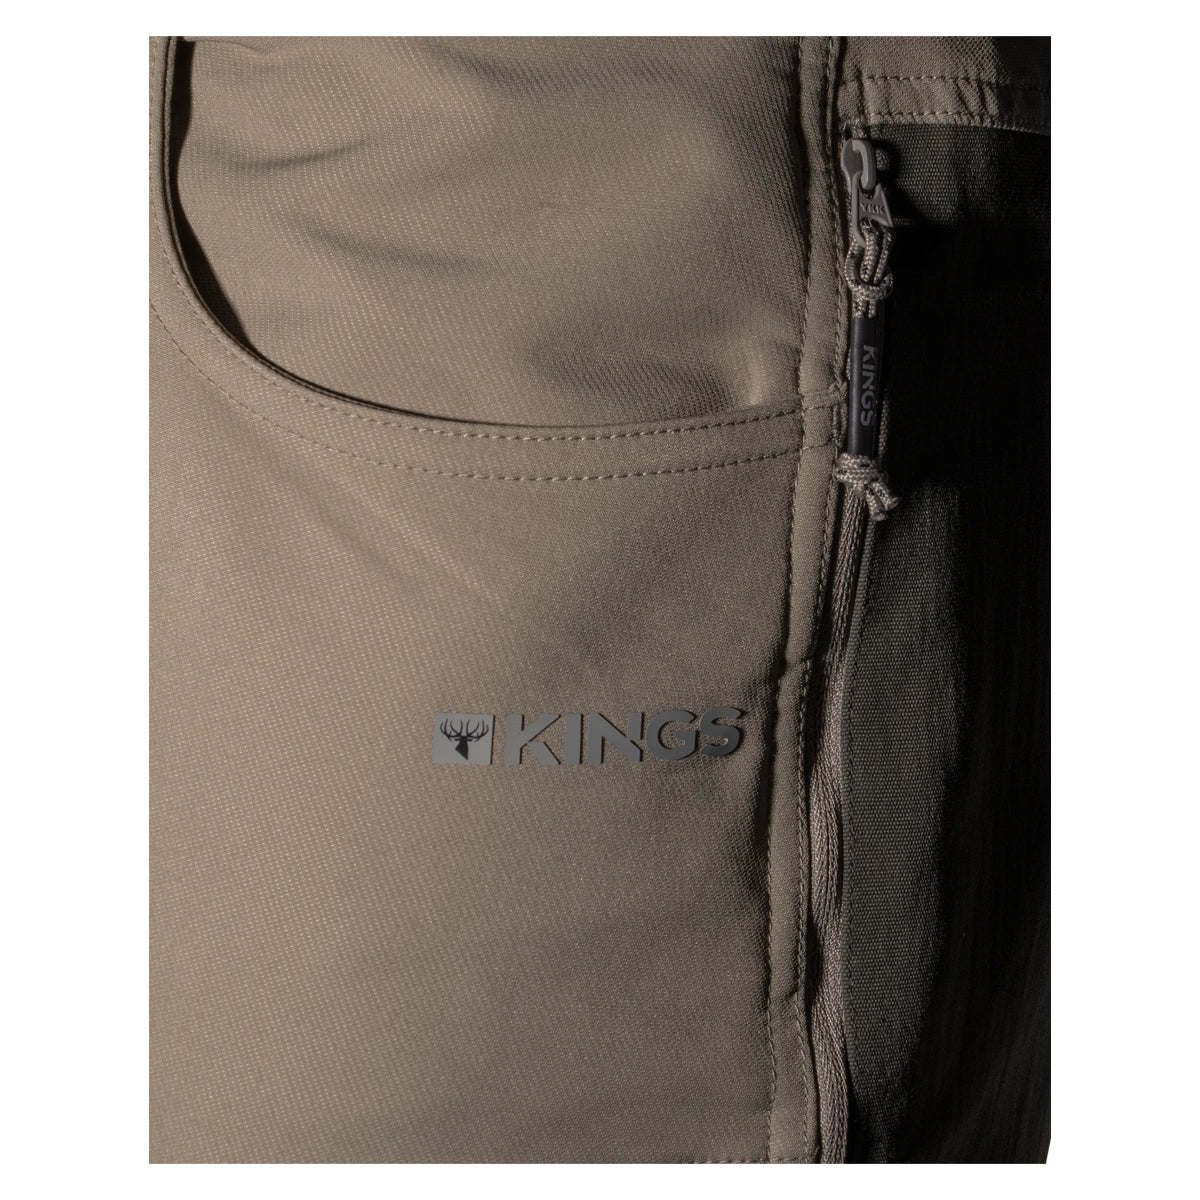 King's XKG Field Pant in  by GOHUNT | King's - GOHUNT Shop